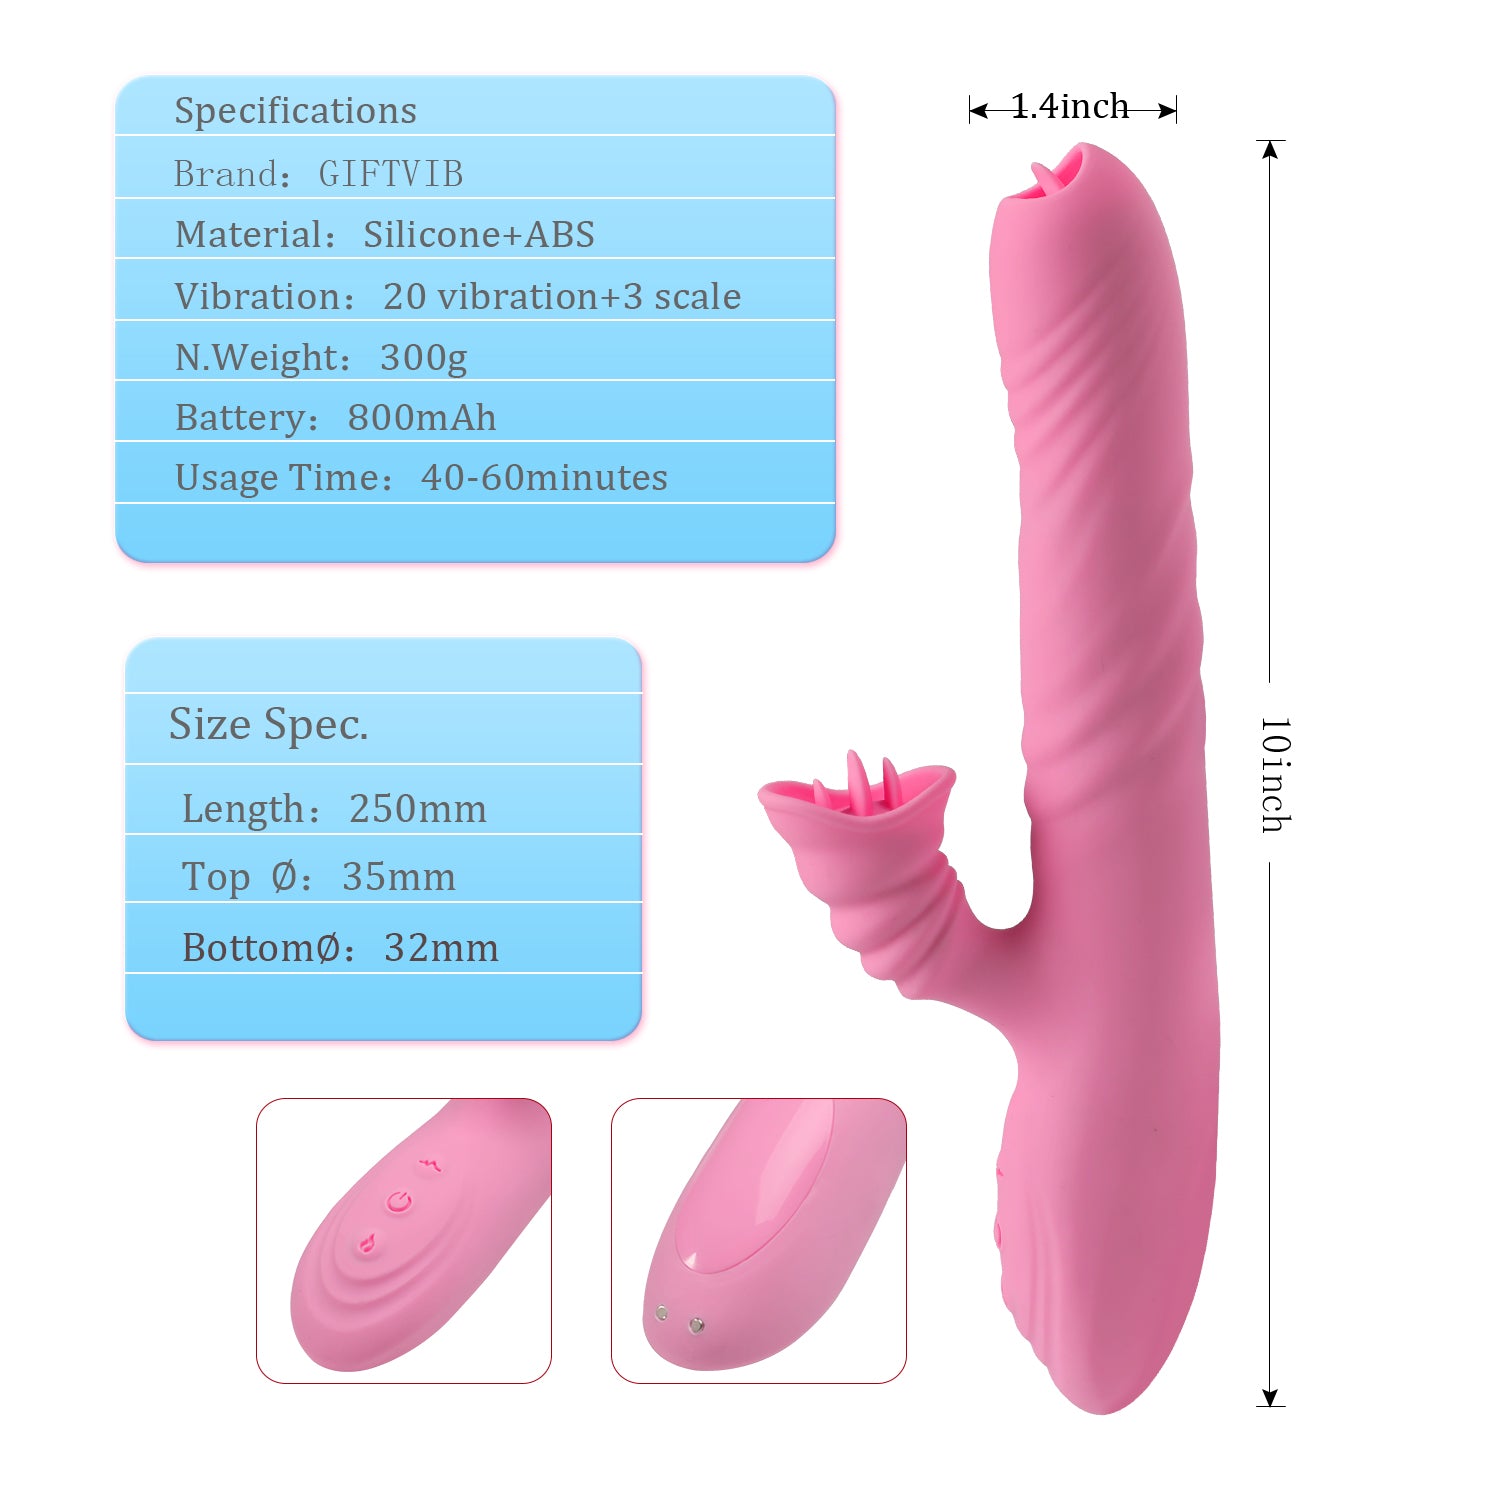 Beaded Thrusting Rabbit Vibrator -  Triple Action G Spot Vibrator with Independent Clitoral Stimulator, 10 Patterns, Waterproof & Rechargeable Sex Toys for Women with Tongue licking,Rose